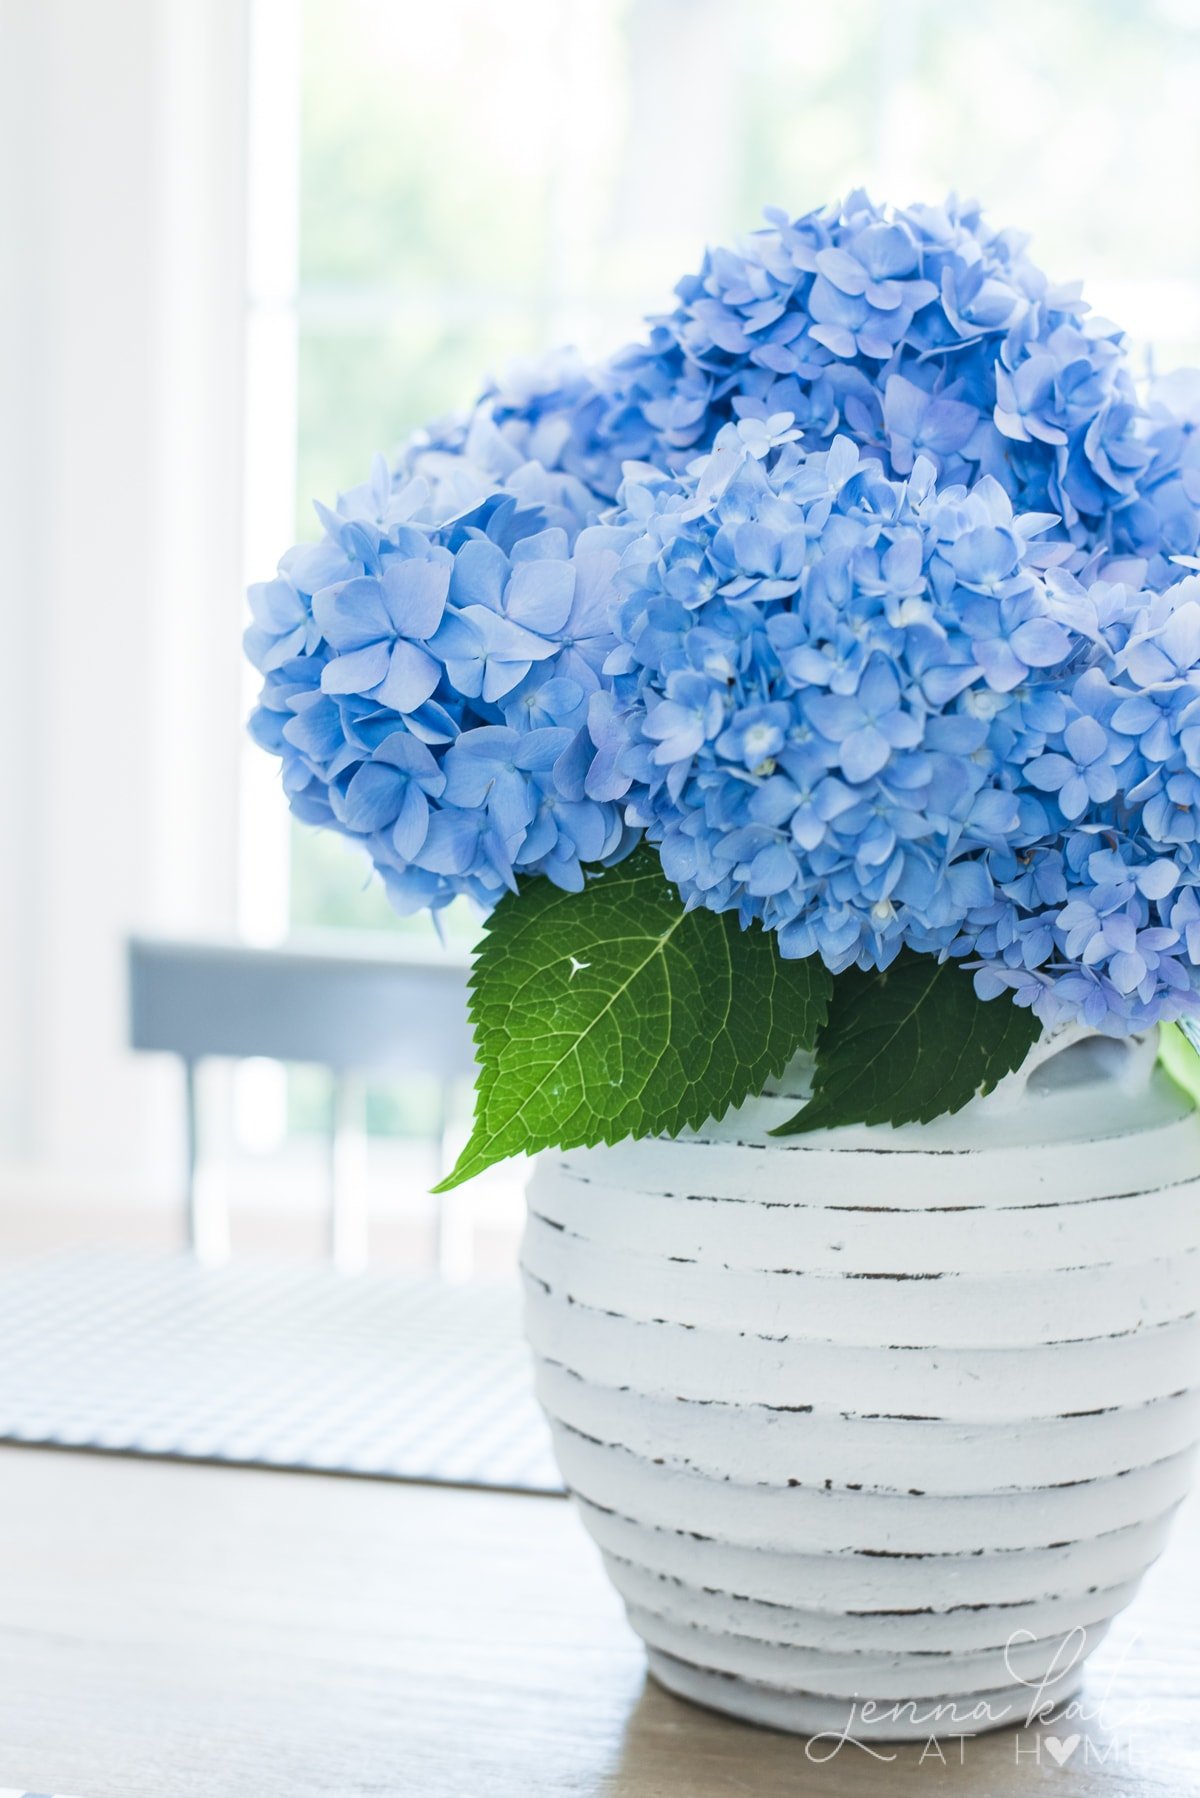 Vase filled with hydrangeas that last for up to 3 weeks